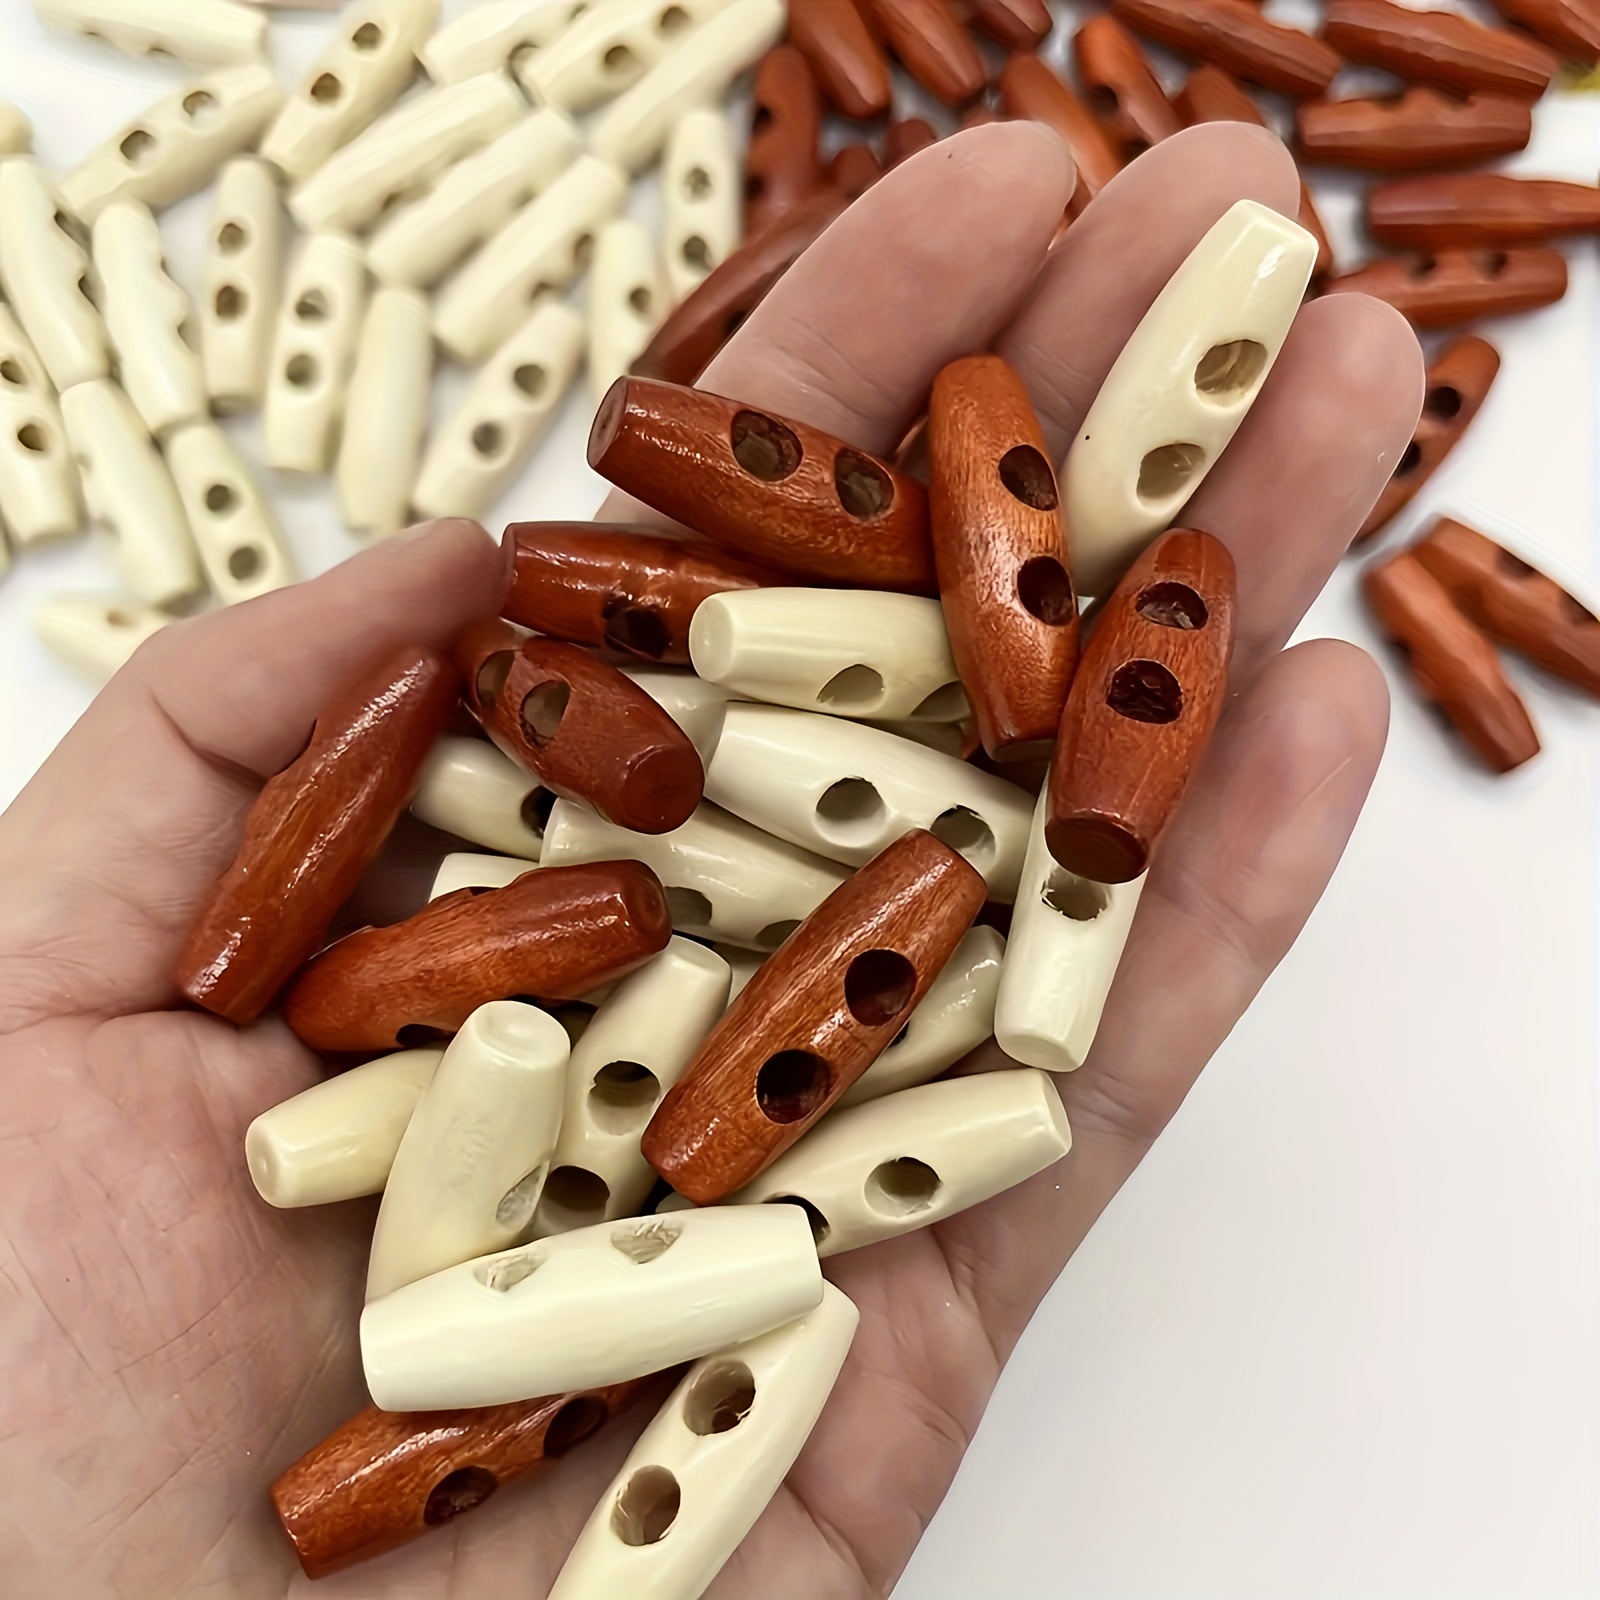 Wooden toggle buttons 15-50mm natural - 30-50pcs